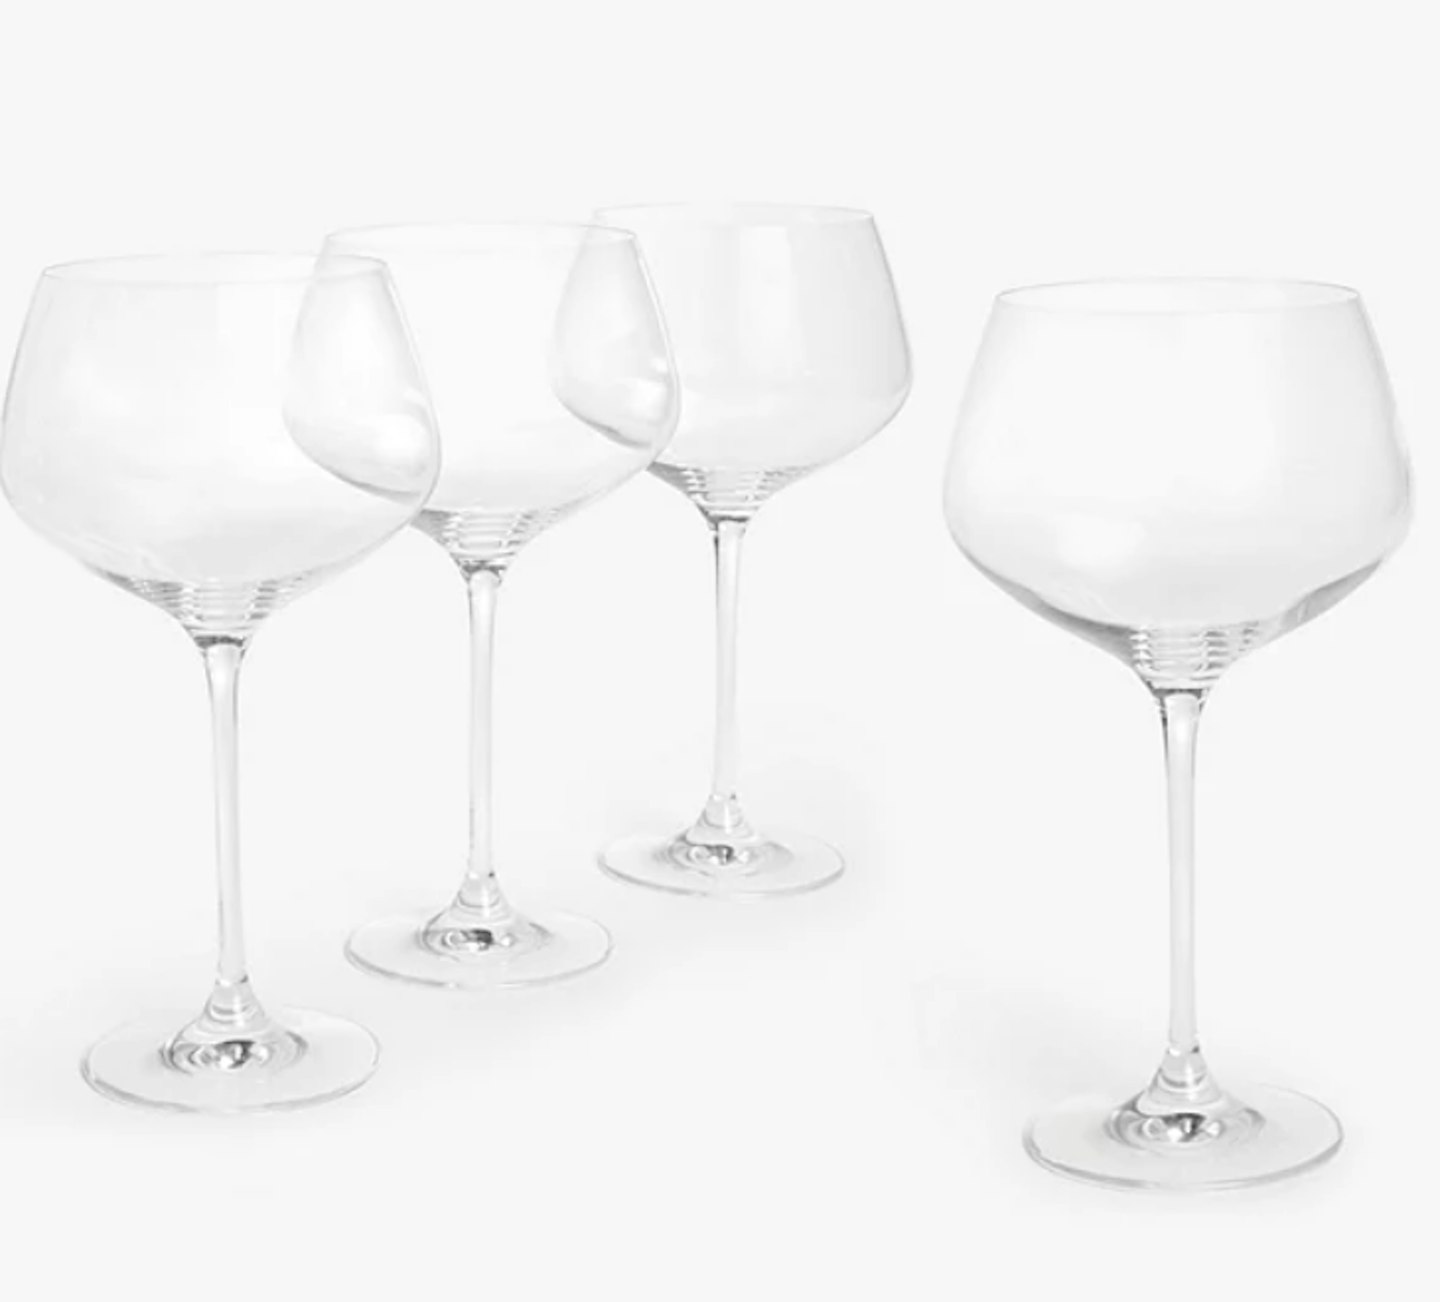 John Lewis & Partners Sip Gin Cocktail Glass, Set of 4, 720ml, Clear